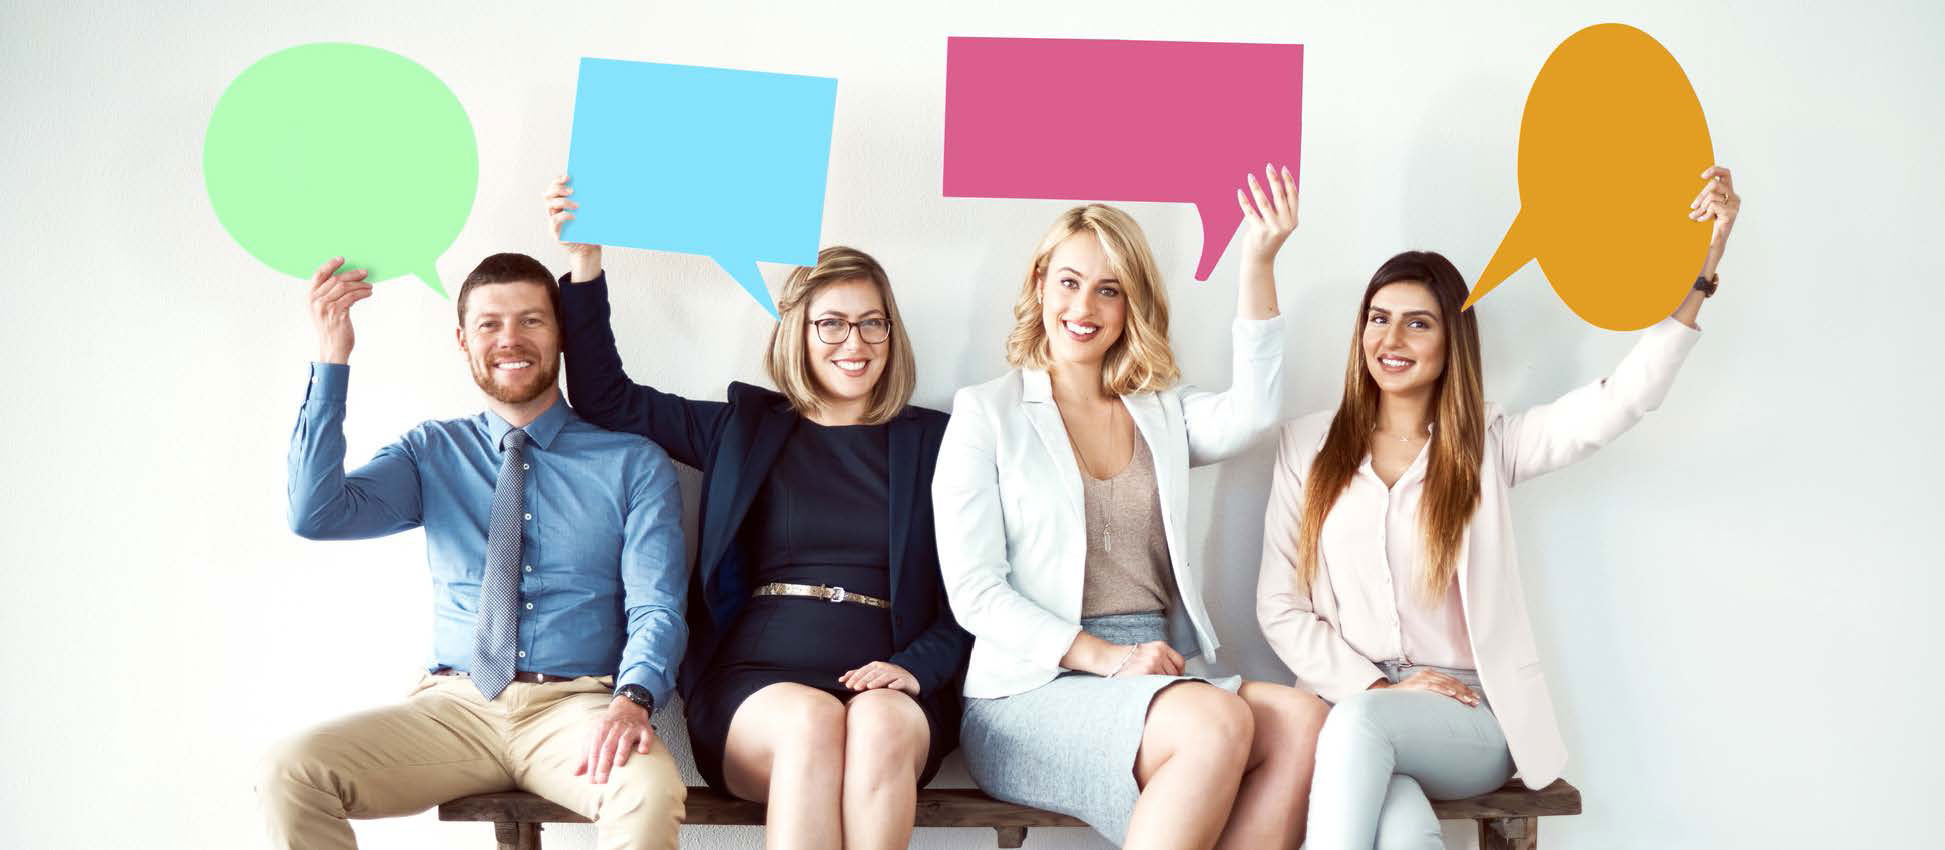 Four people in business attire on bench, holding big speech bubbles above heads